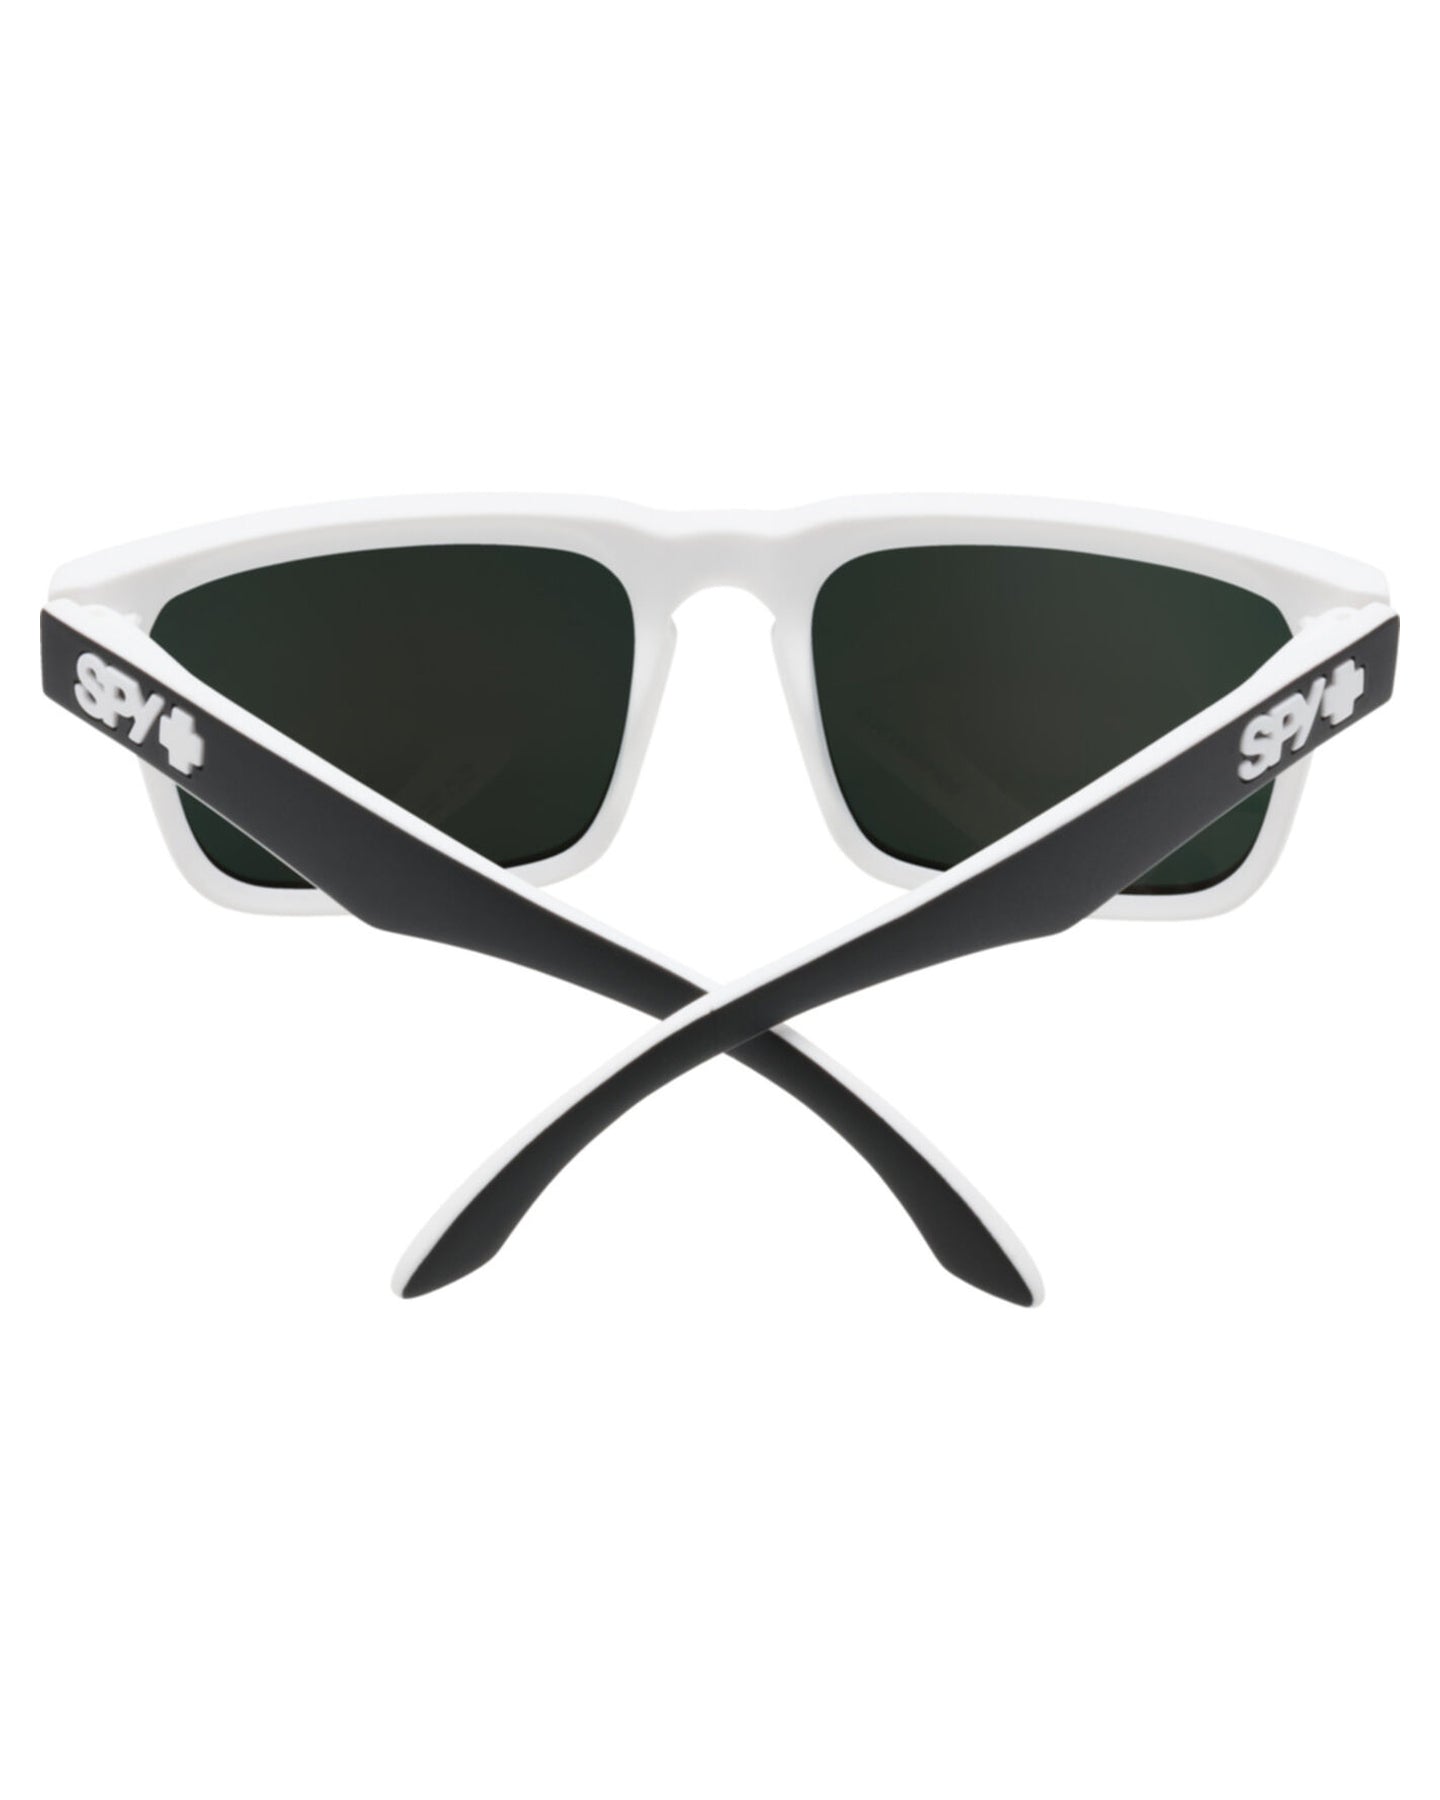 Spy Helm Whitewall - Happy Gray Green With Red Spectra Mirror Sunglasses - SnowSkiersWarehouse